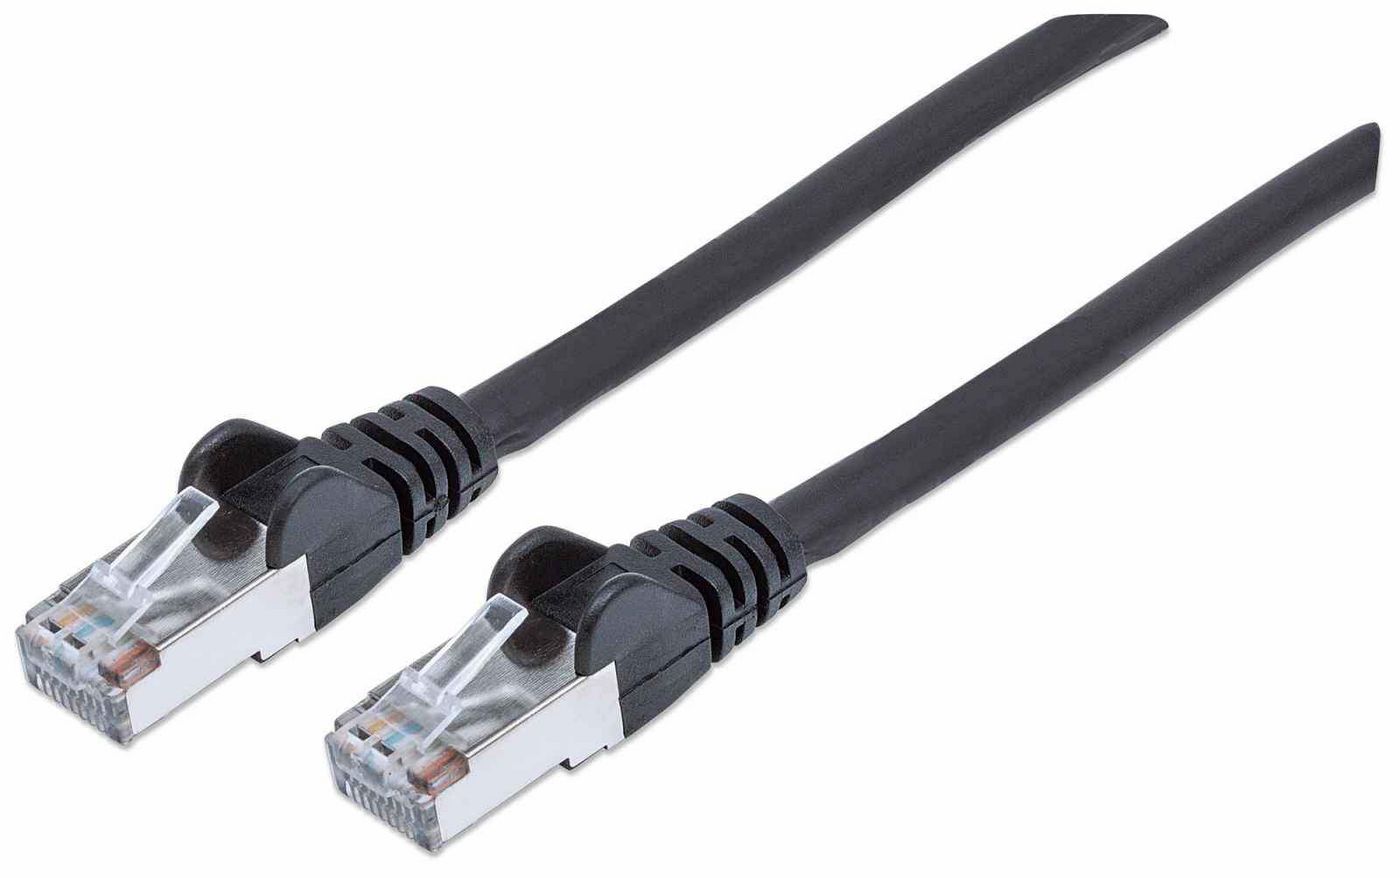 Intellinet 741163 High Performance Network Cable 